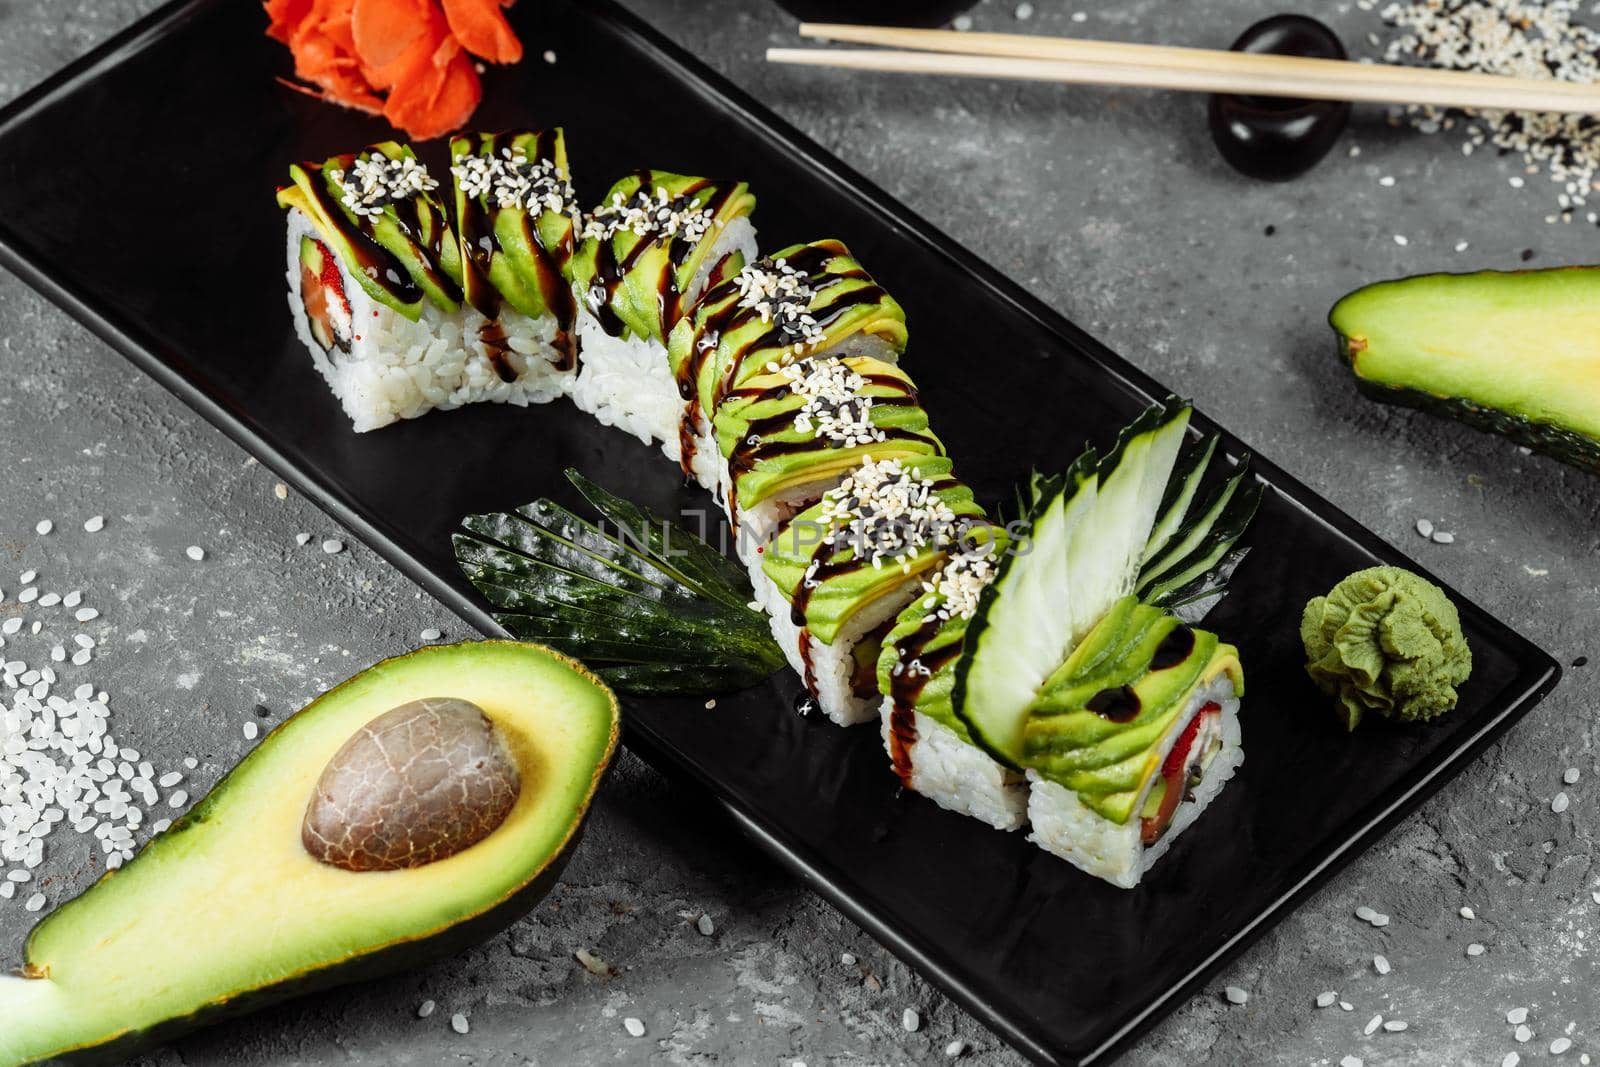 Green dragon sushi roll with eel, avocado, cucumber and ginger, accompanied with fried tempura shrimp. Traditional asian rice sushi healthy seafood by UcheaD